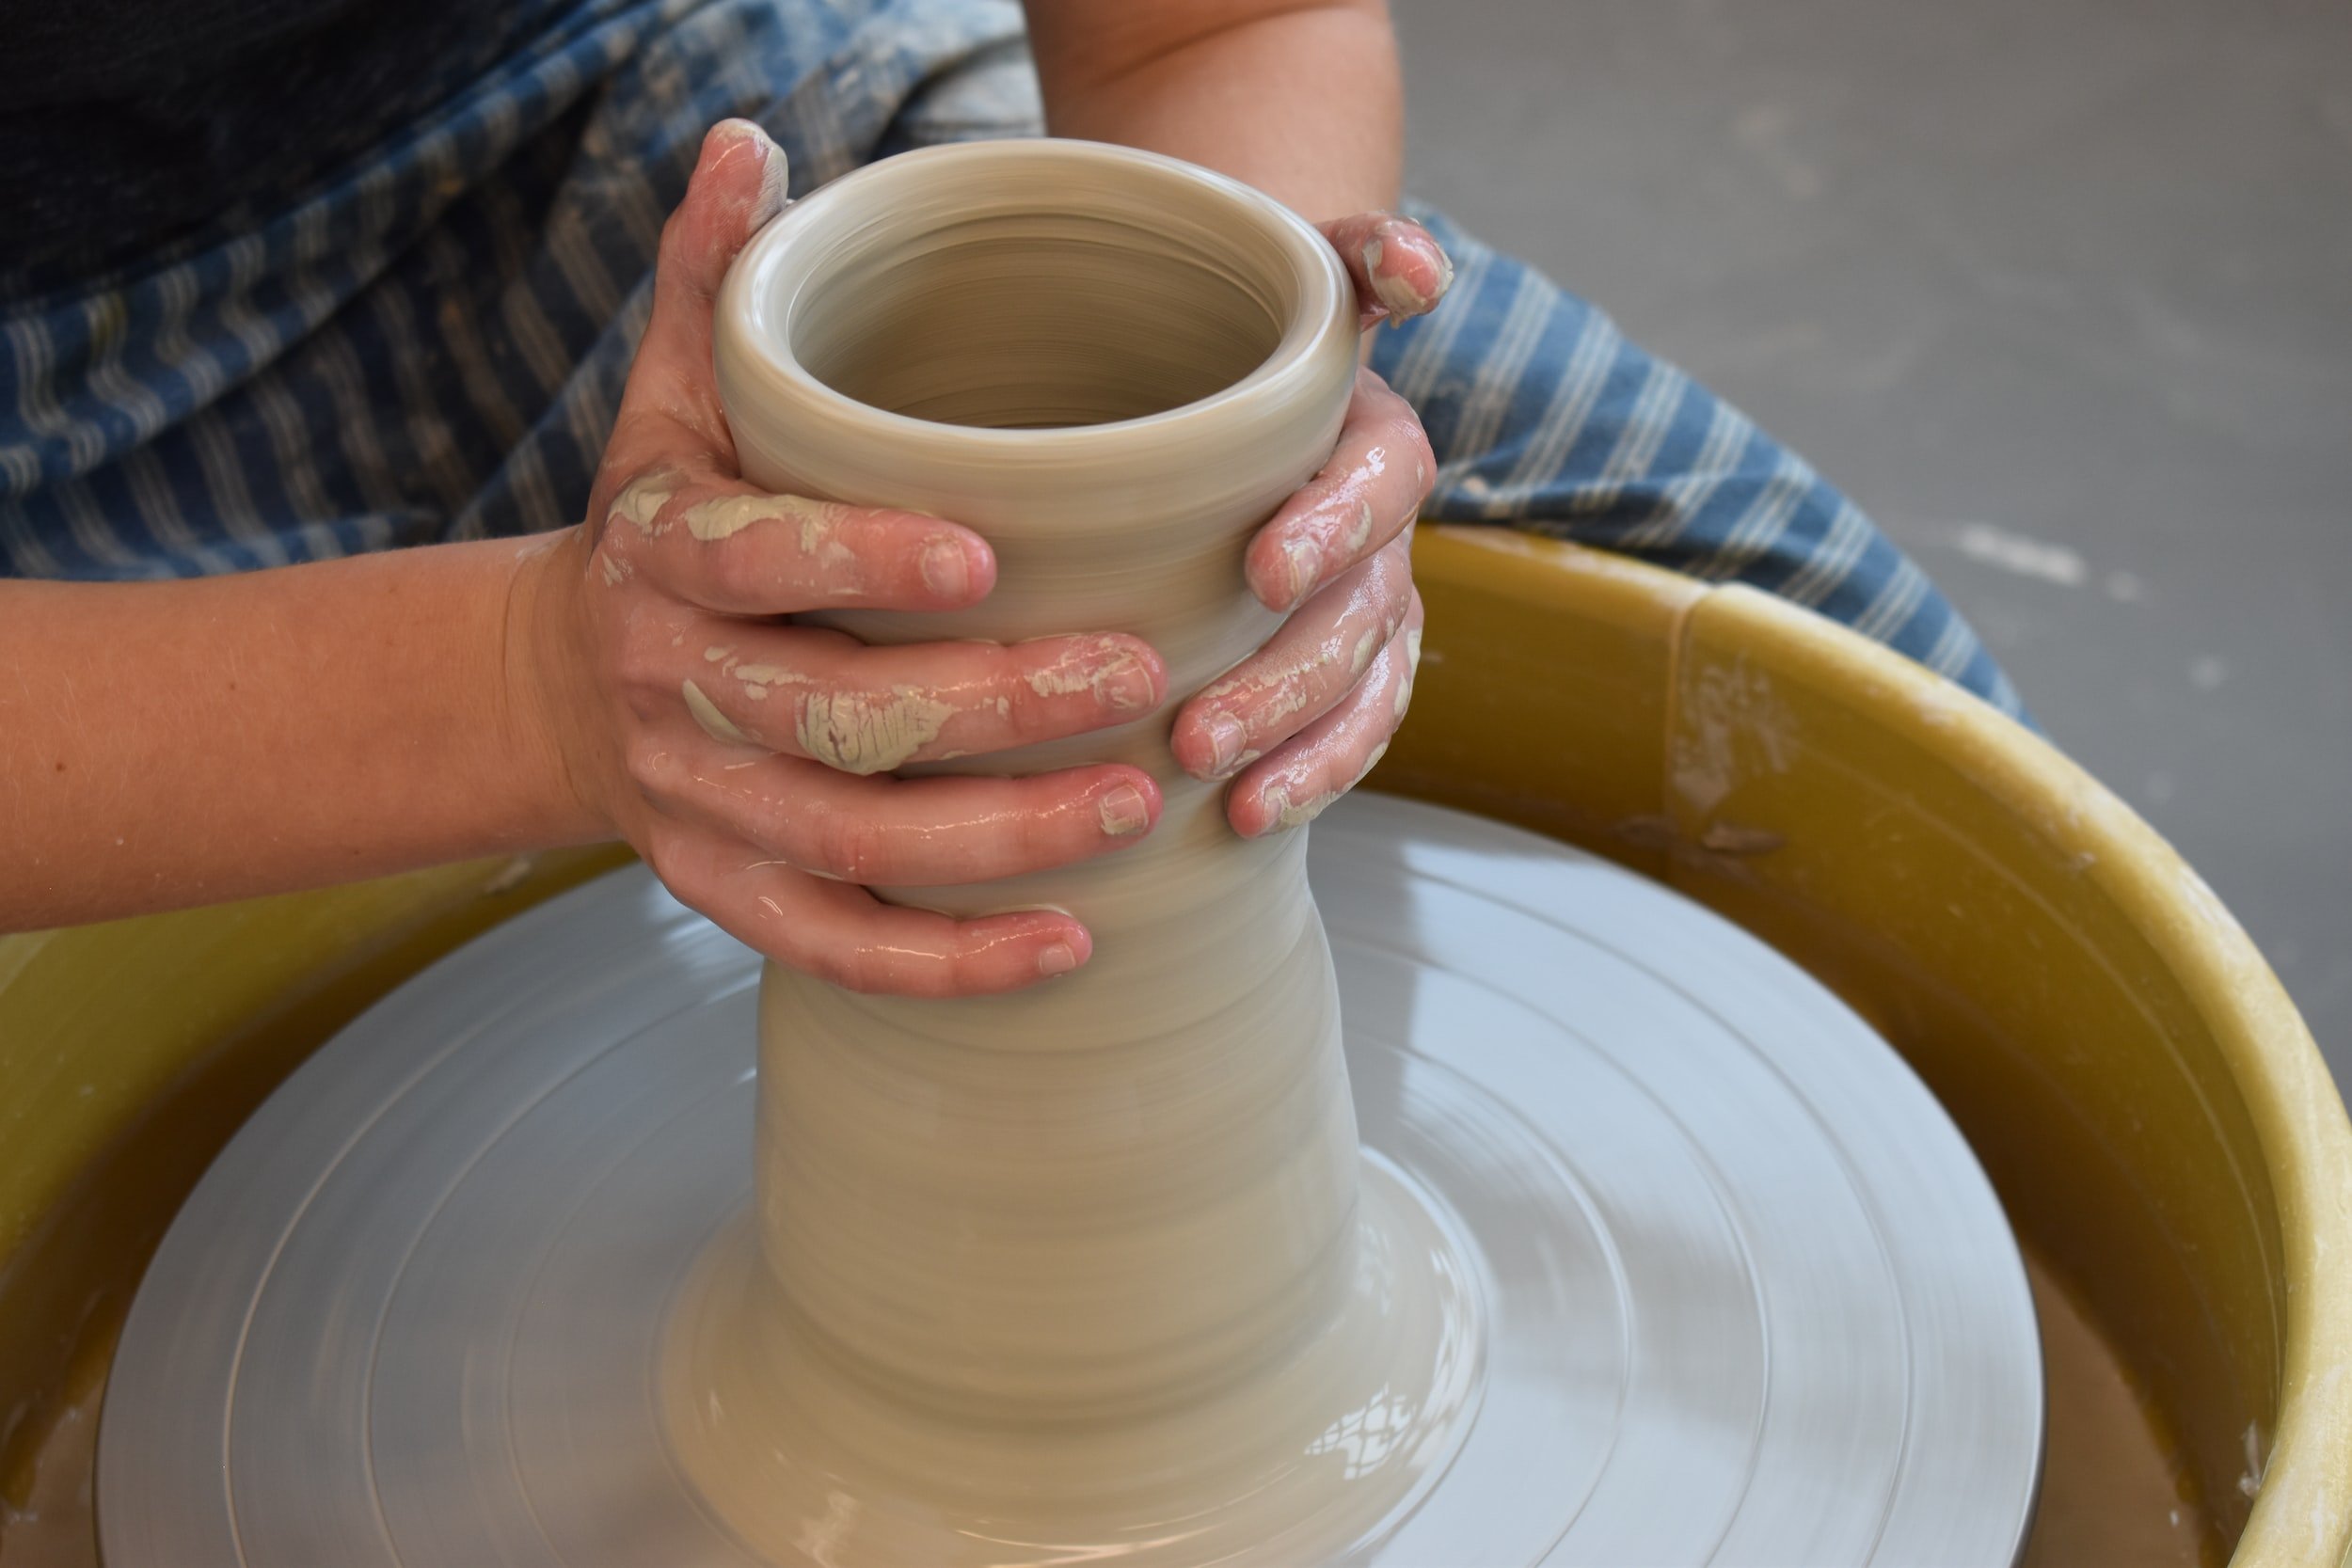 Date Night Pottery Class for 2-6 - Pottery Wheel Classes San Diego |  CourseHorse - Art Wheel